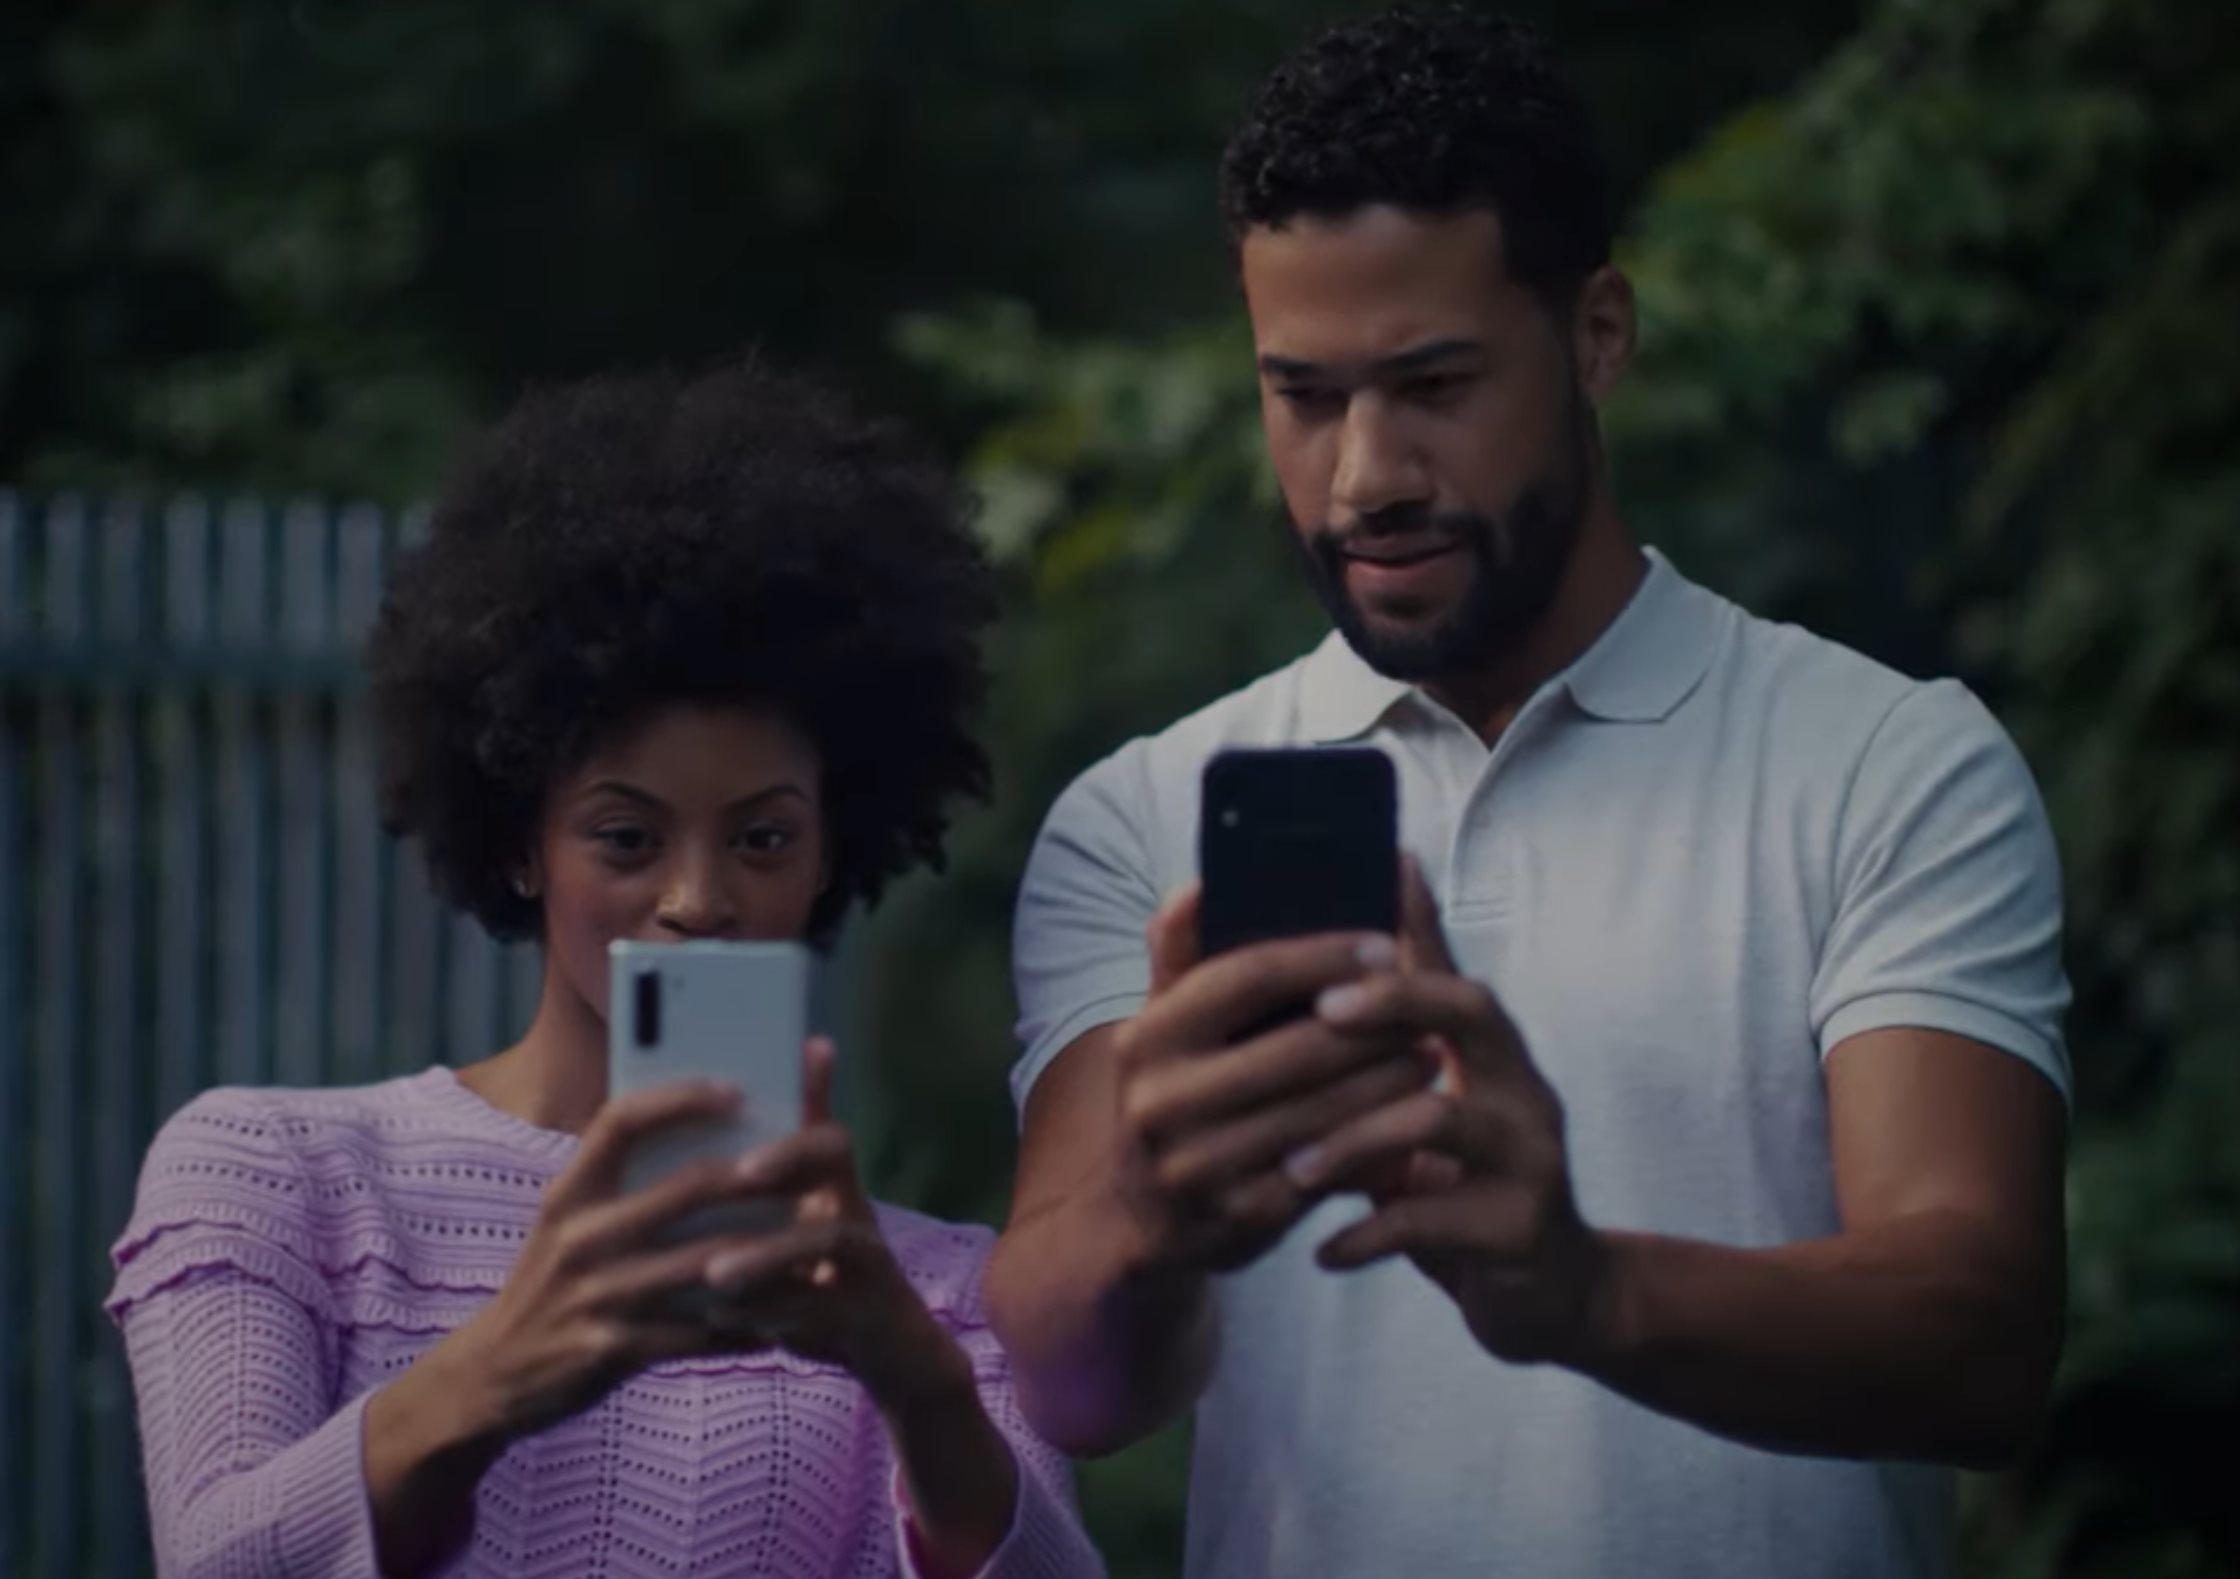 Samsung shows iphone 11 fans why they ll drool after a galaxy note 10 video 527395 2